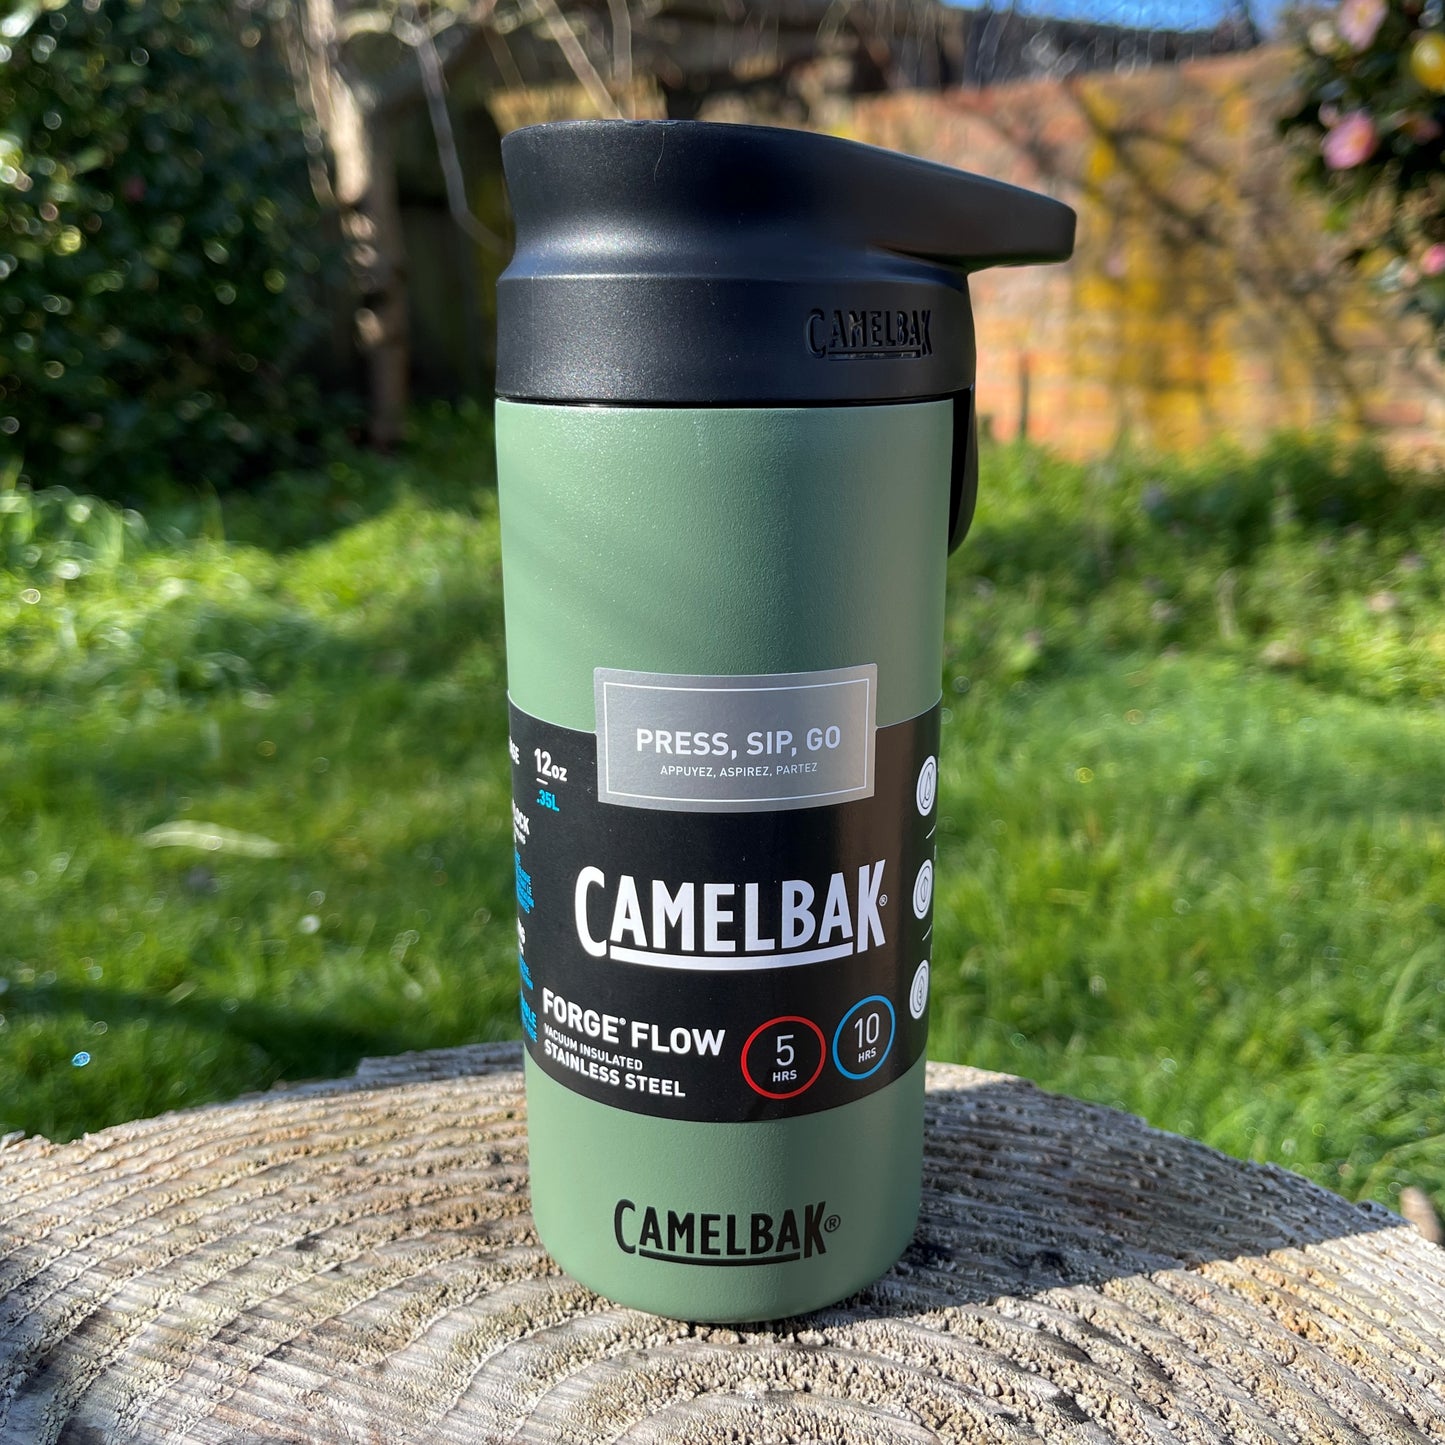 Stainless steel Camelbak insulated coffee cup with a press to sip function in moss green colour.